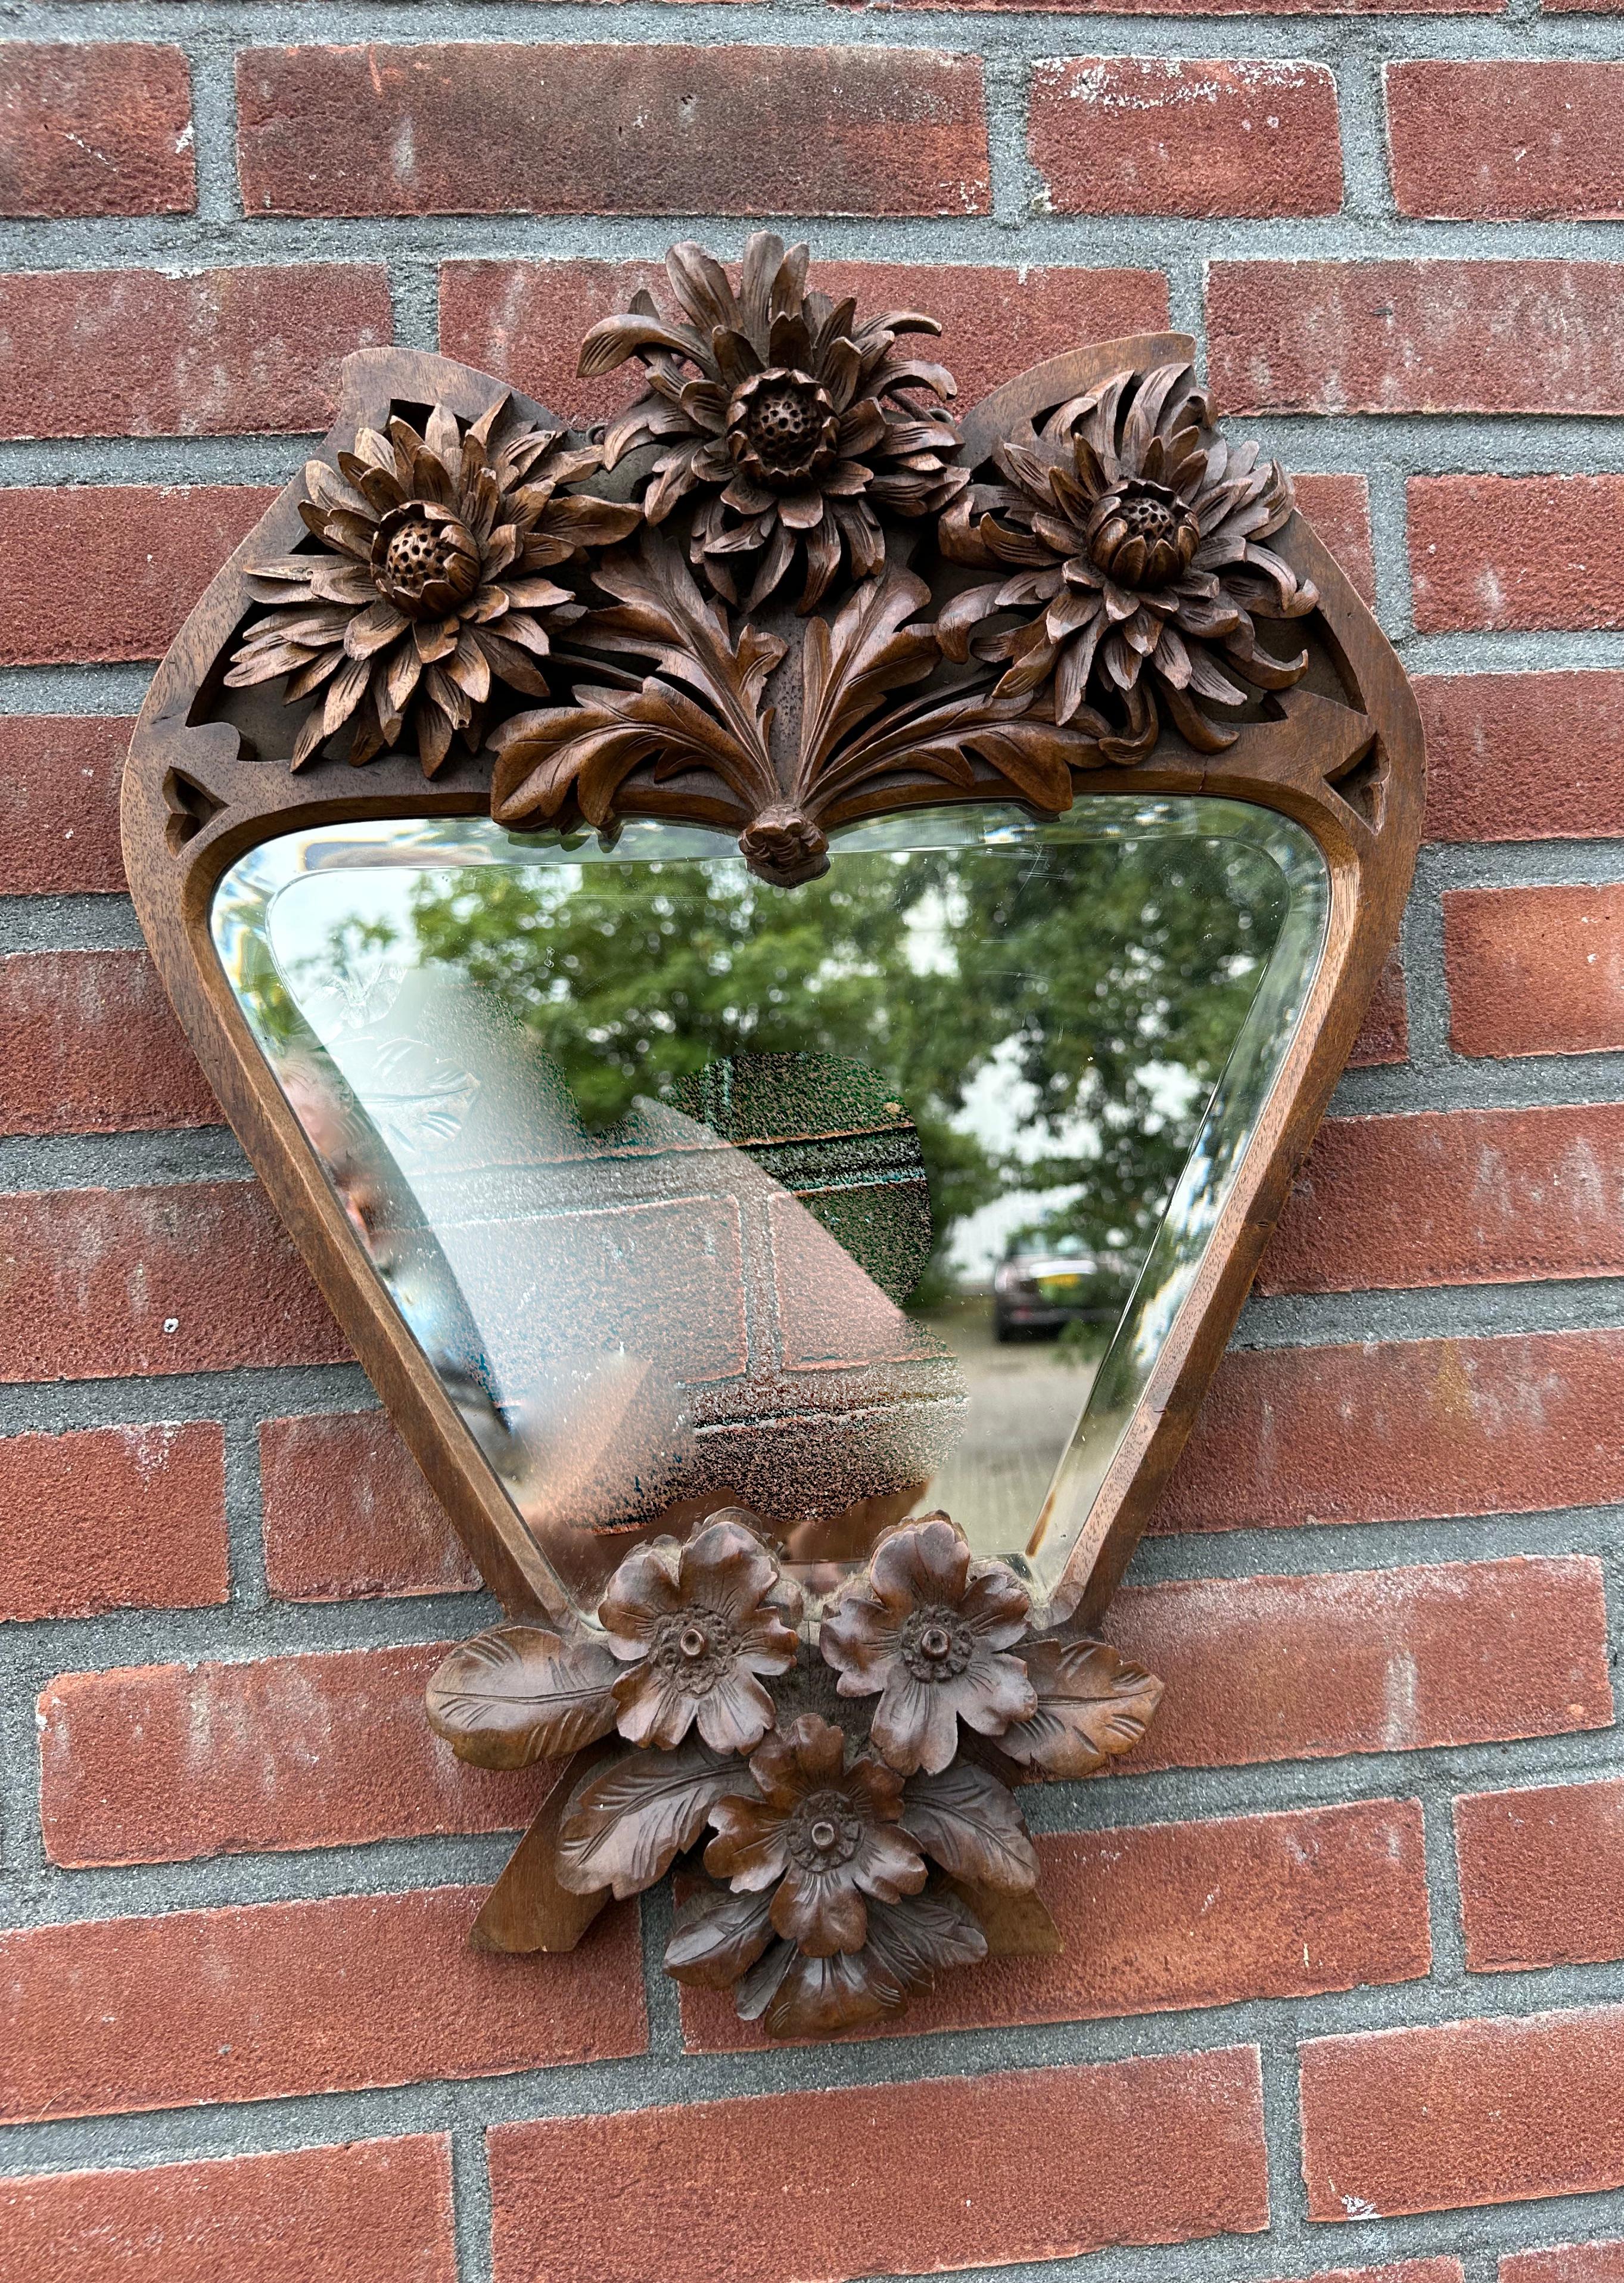 Beautifully hand carved and truly artistic antique mirror with beveled glass.

If you are looking for unique, top quality Arts & Crafts antiques to grace your living space then this one of a kind mirror could be flying your way soon. This is the